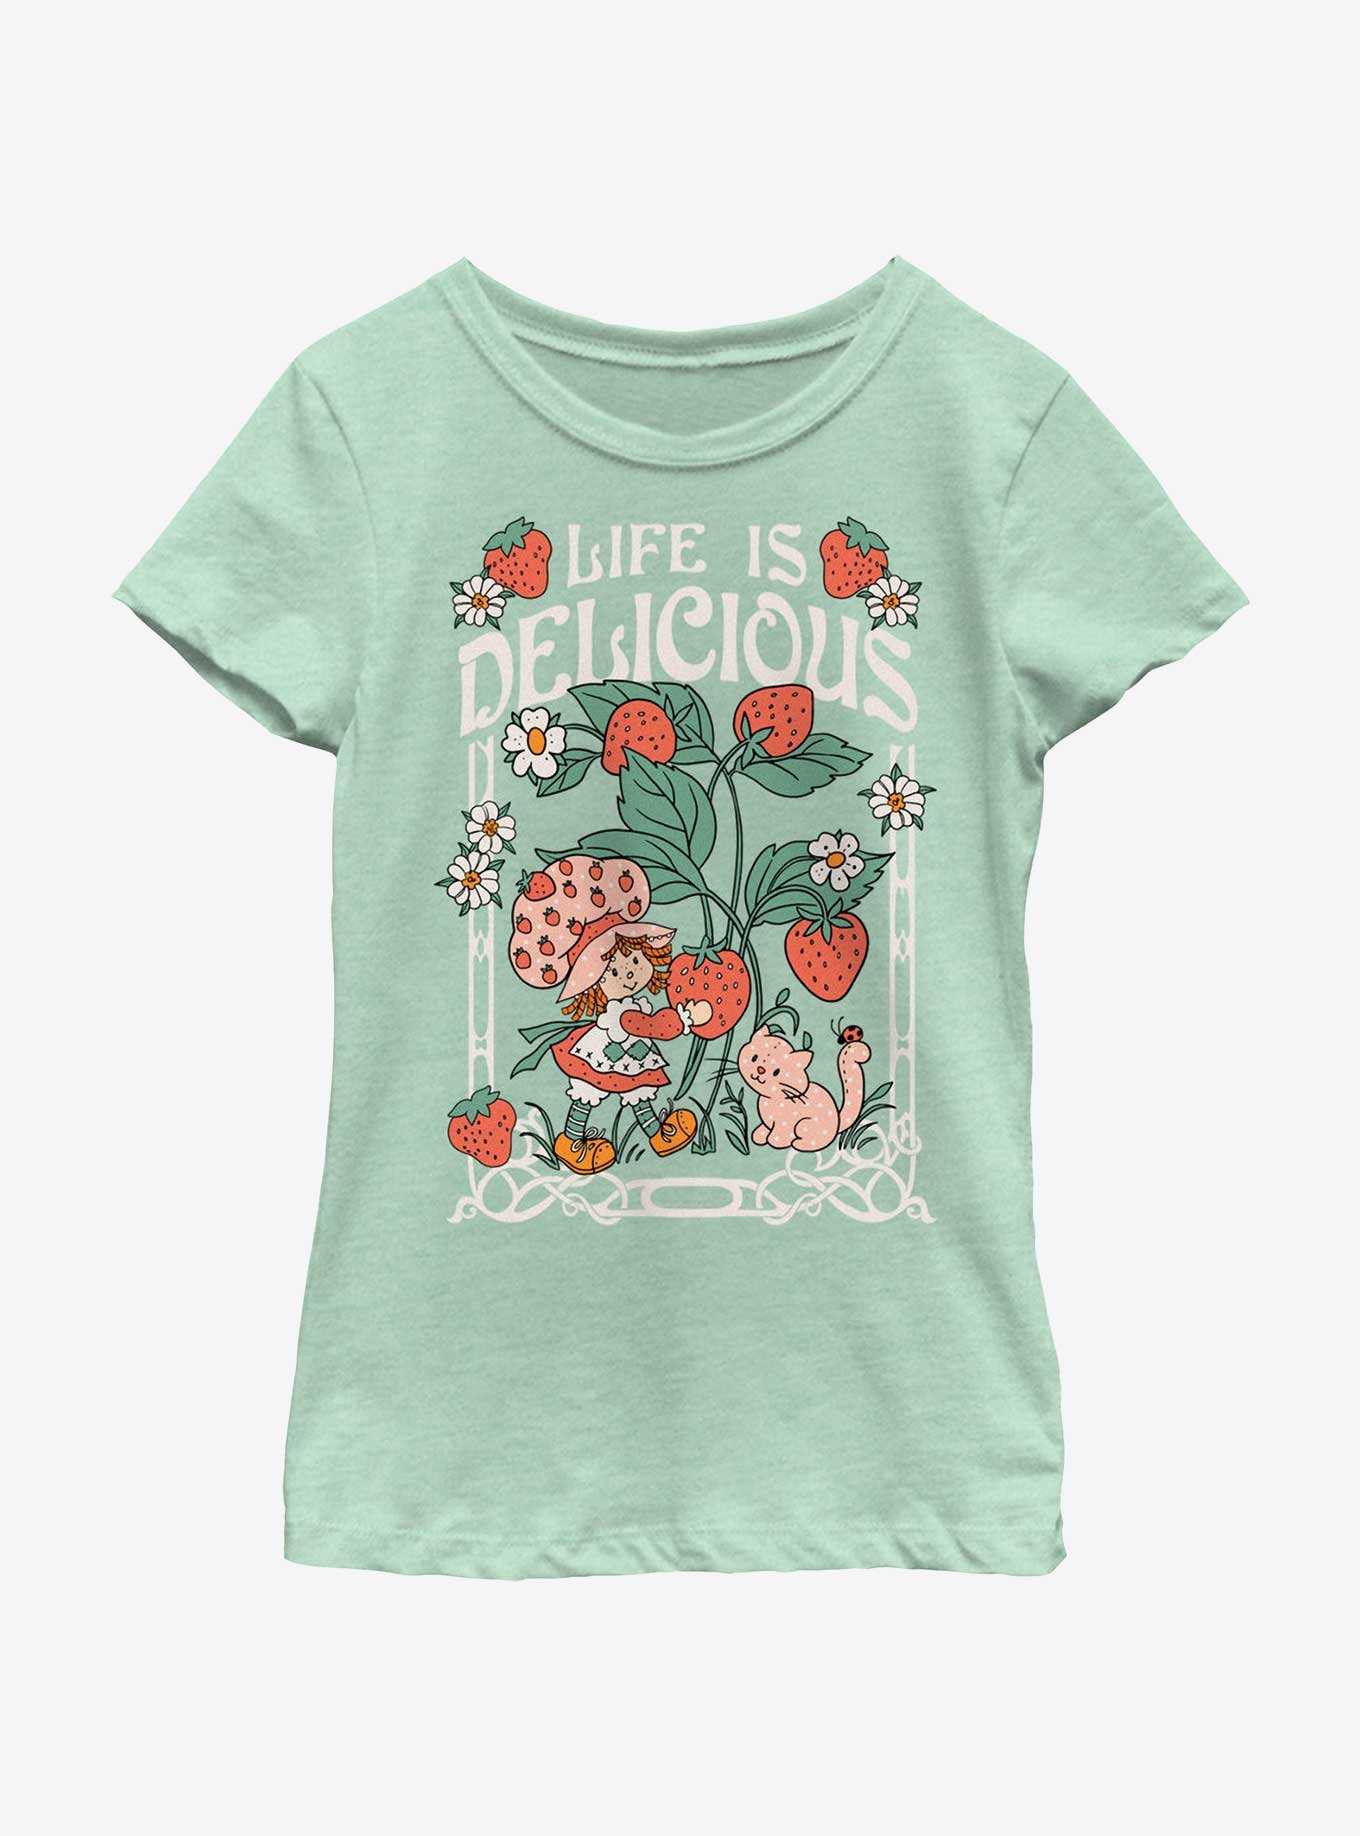 Strawberry Shortcake Life Is Delicious Youth Girls T-Shirt, , hi-res